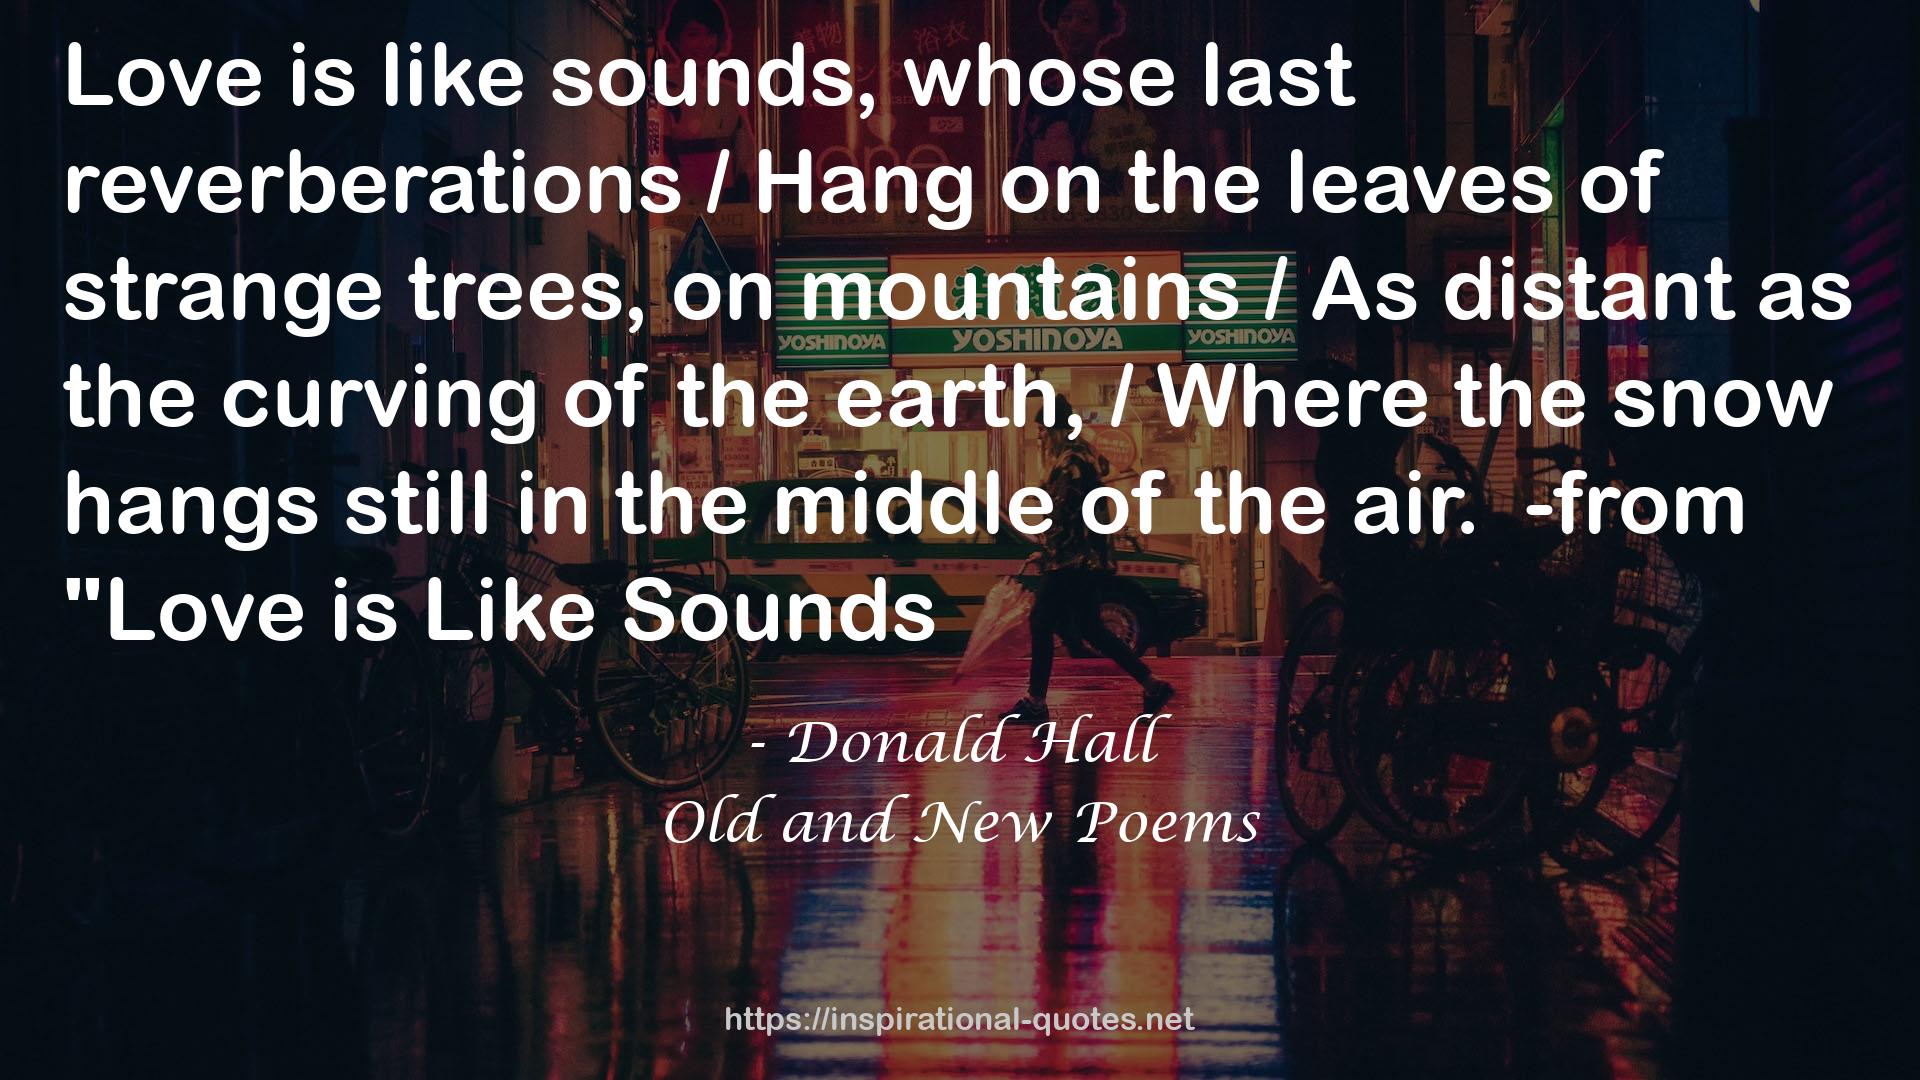 Old and New Poems QUOTES